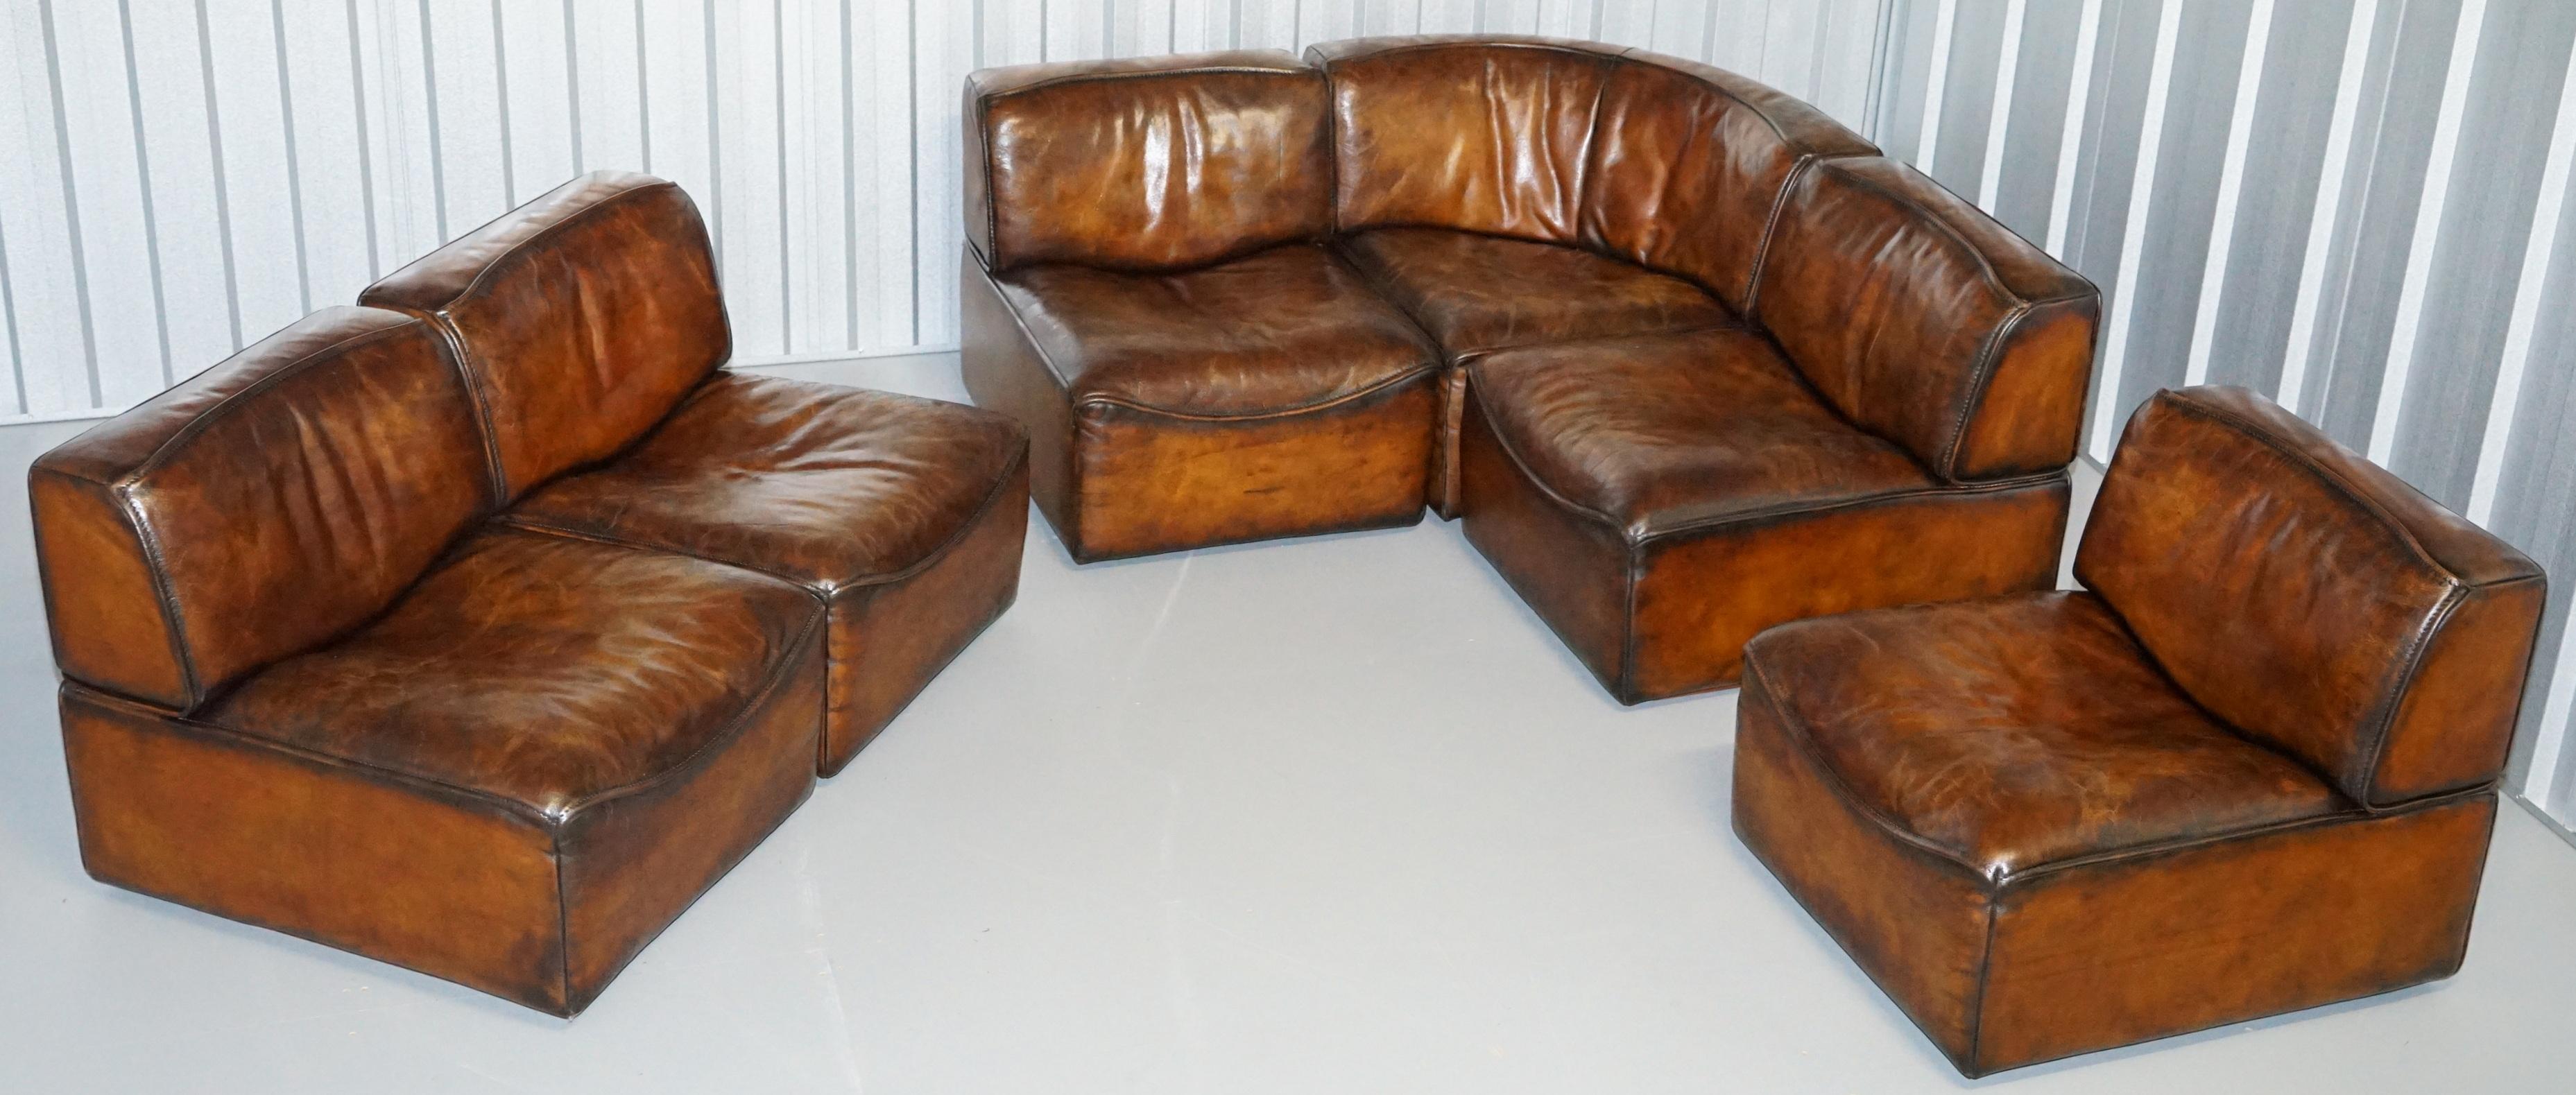 We are delighted to offer for sale this very rare fully restored hand dyed cigar brown leather original De sede DS15 sectional modular corner sofa suite with original paperwork dating to 1975

The DS15 is pure genius, you can have it arranged any